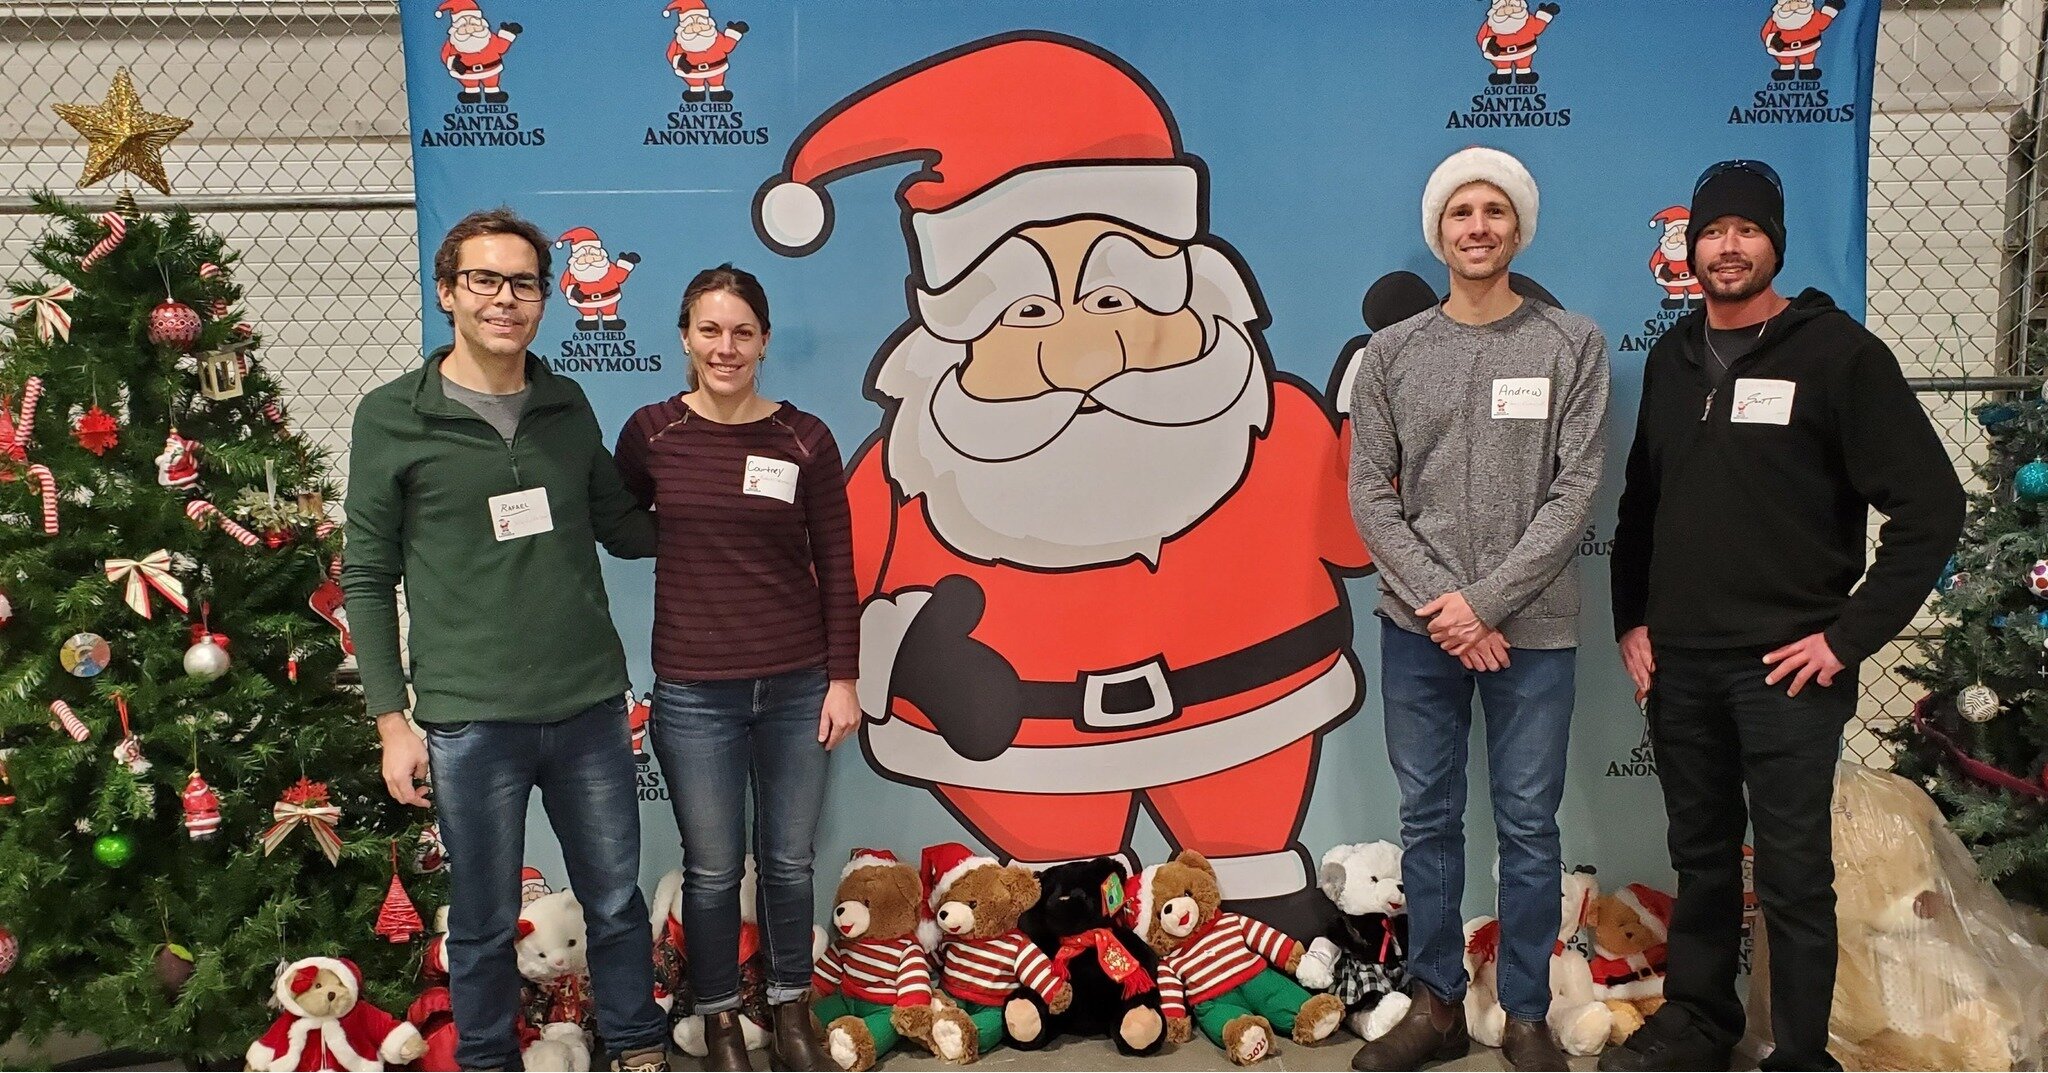 We are so grateful we had the opportunity to spend an afternoon volunteering with Santa&rsquo;s Anonymous prepping gifts for families in need. If you or your team are looking for a way to connect or help out they are still looking for drivers or you 